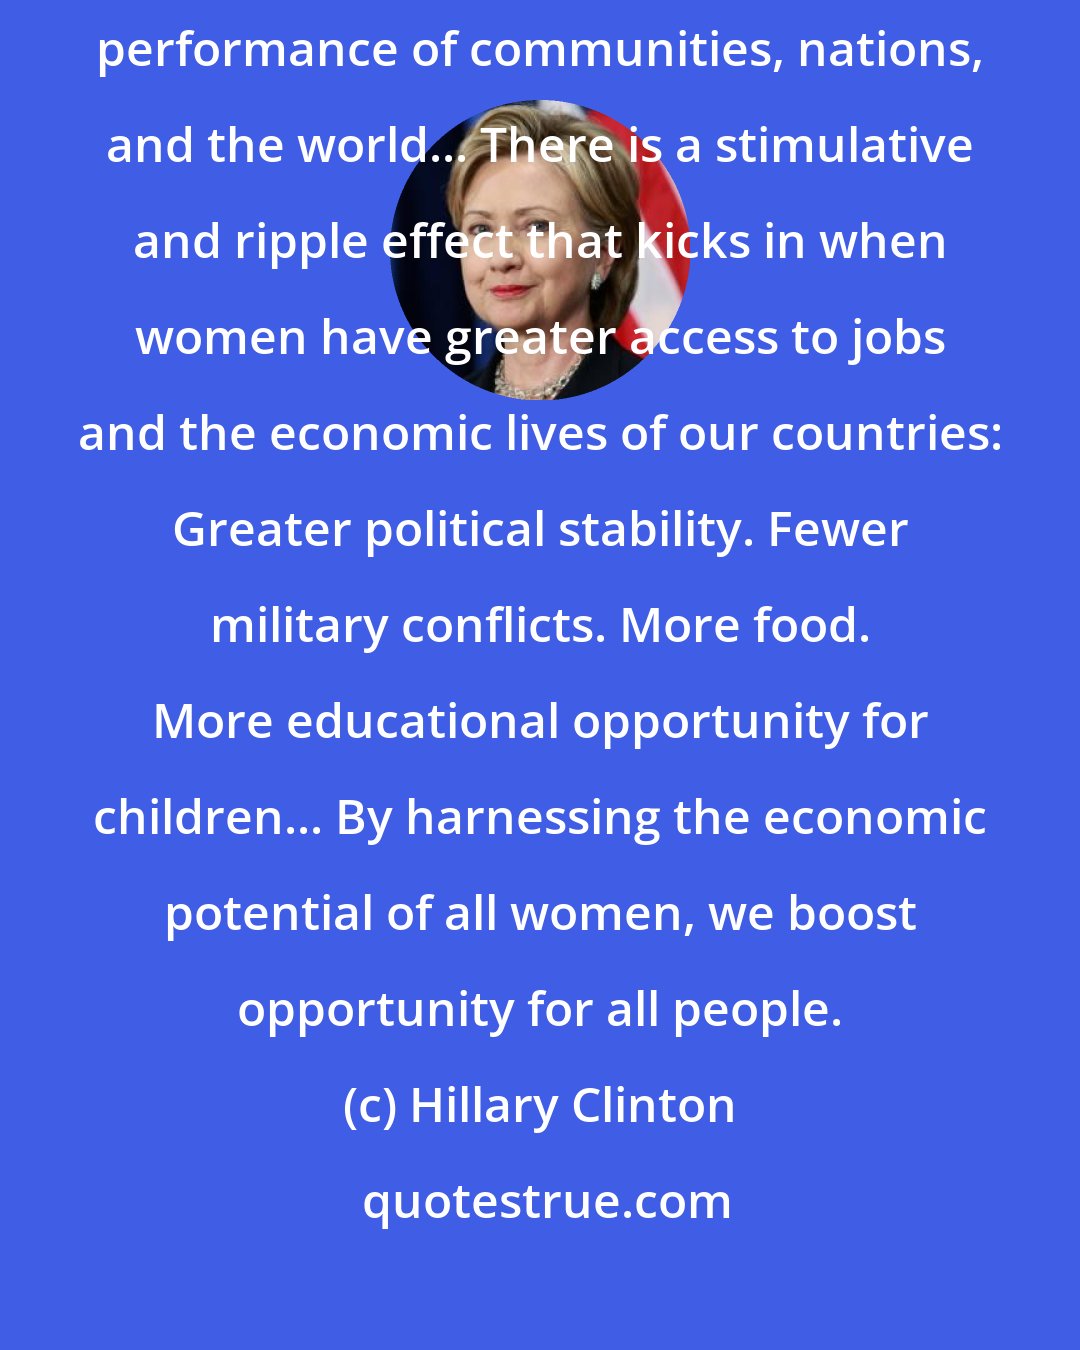 Hillary Clinton: When we liberate the economic potential of women, we elevate the economic performance of communities, nations, and the world... There is a stimulative and ripple effect that kicks in when women have greater access to jobs and the economic lives of our countries: Greater political stability. Fewer military conflicts. More food. More educational opportunity for children... By harnessing the economic potential of all women, we boost opportunity for all people.